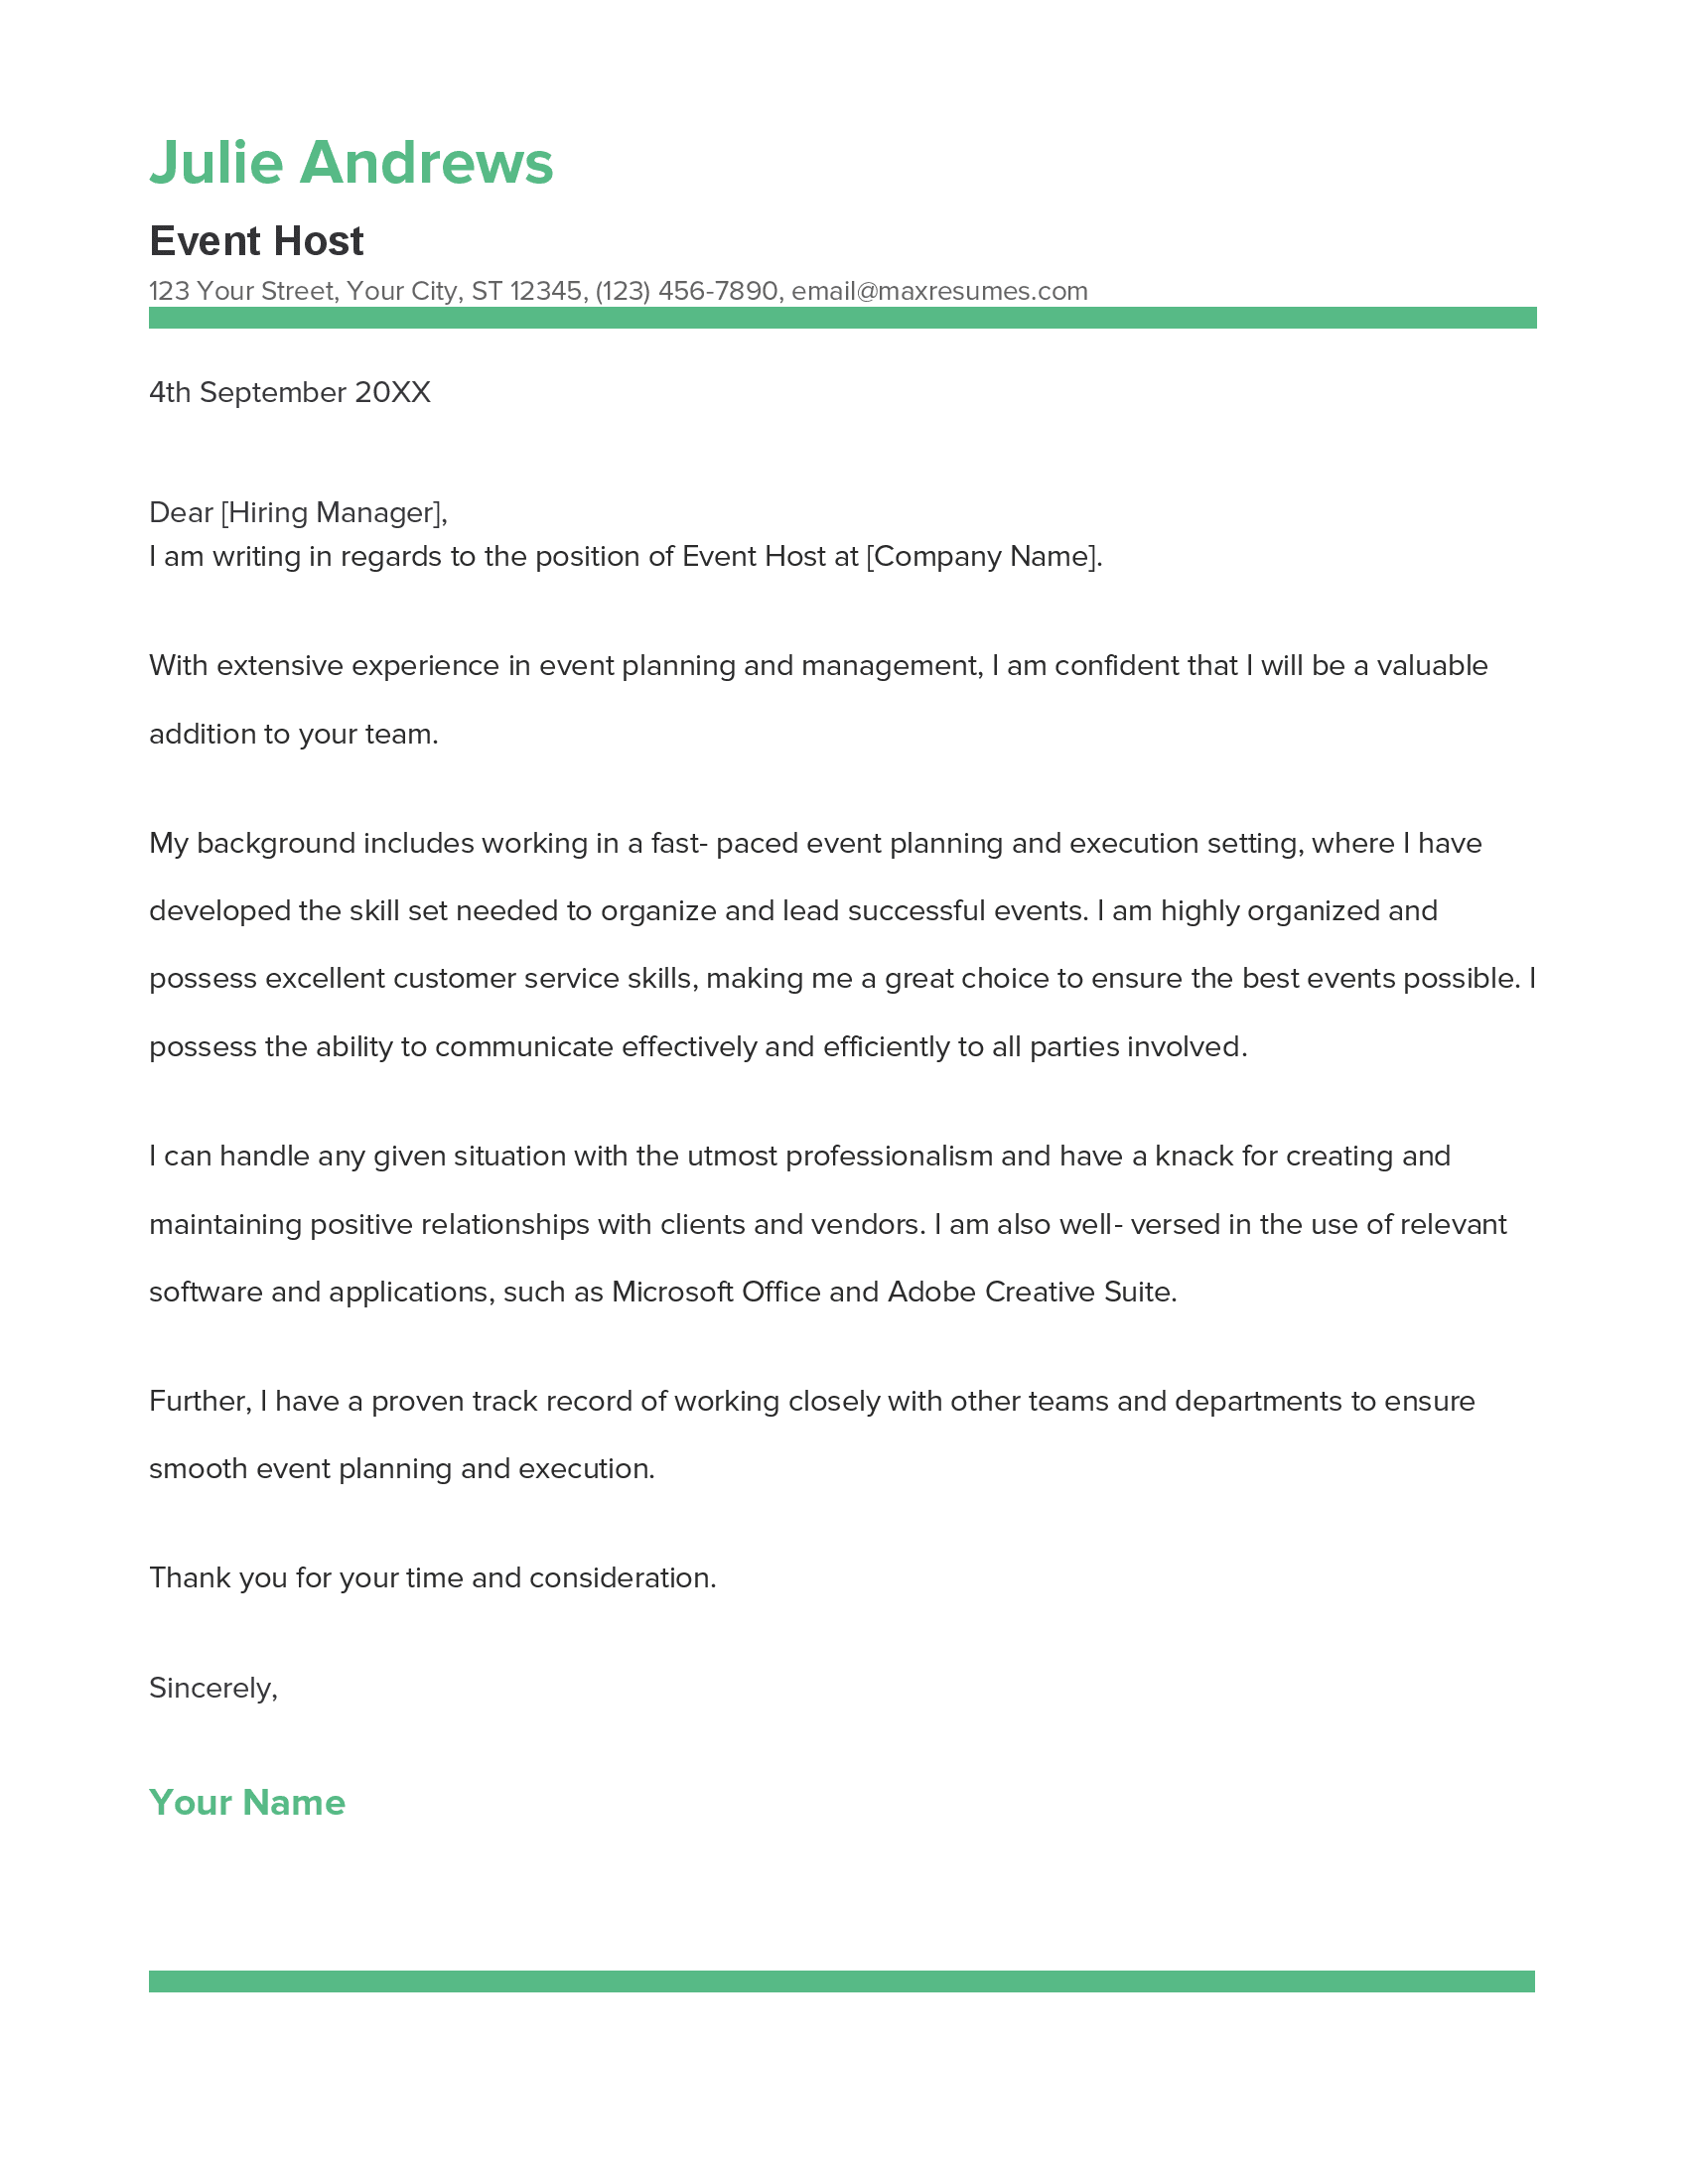 Event Host Cover Letter Example